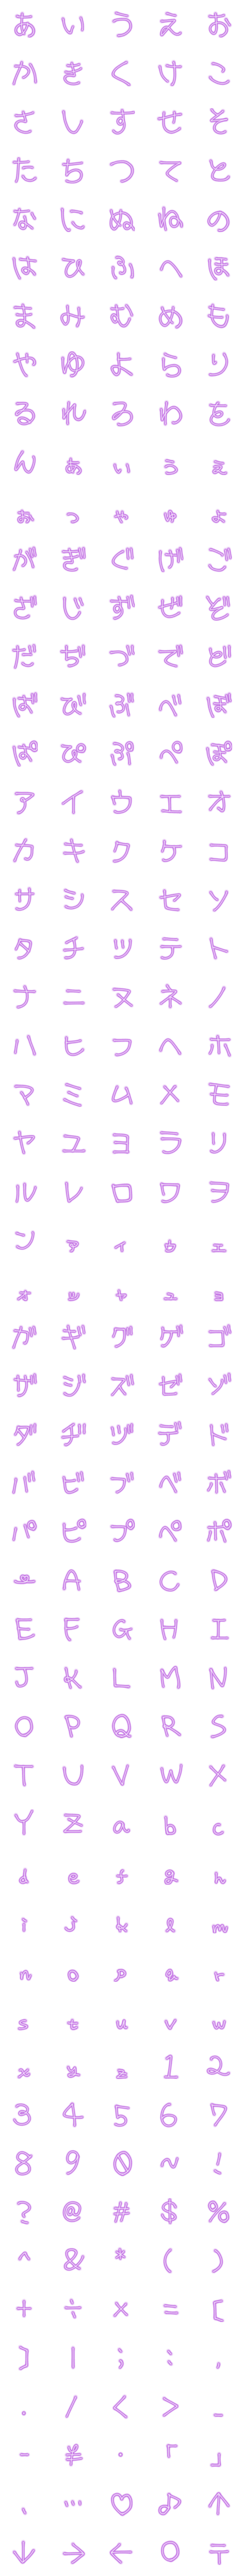 [LINE絵文字]♡ぴんくくせ字デコ文字♡の画像一覧